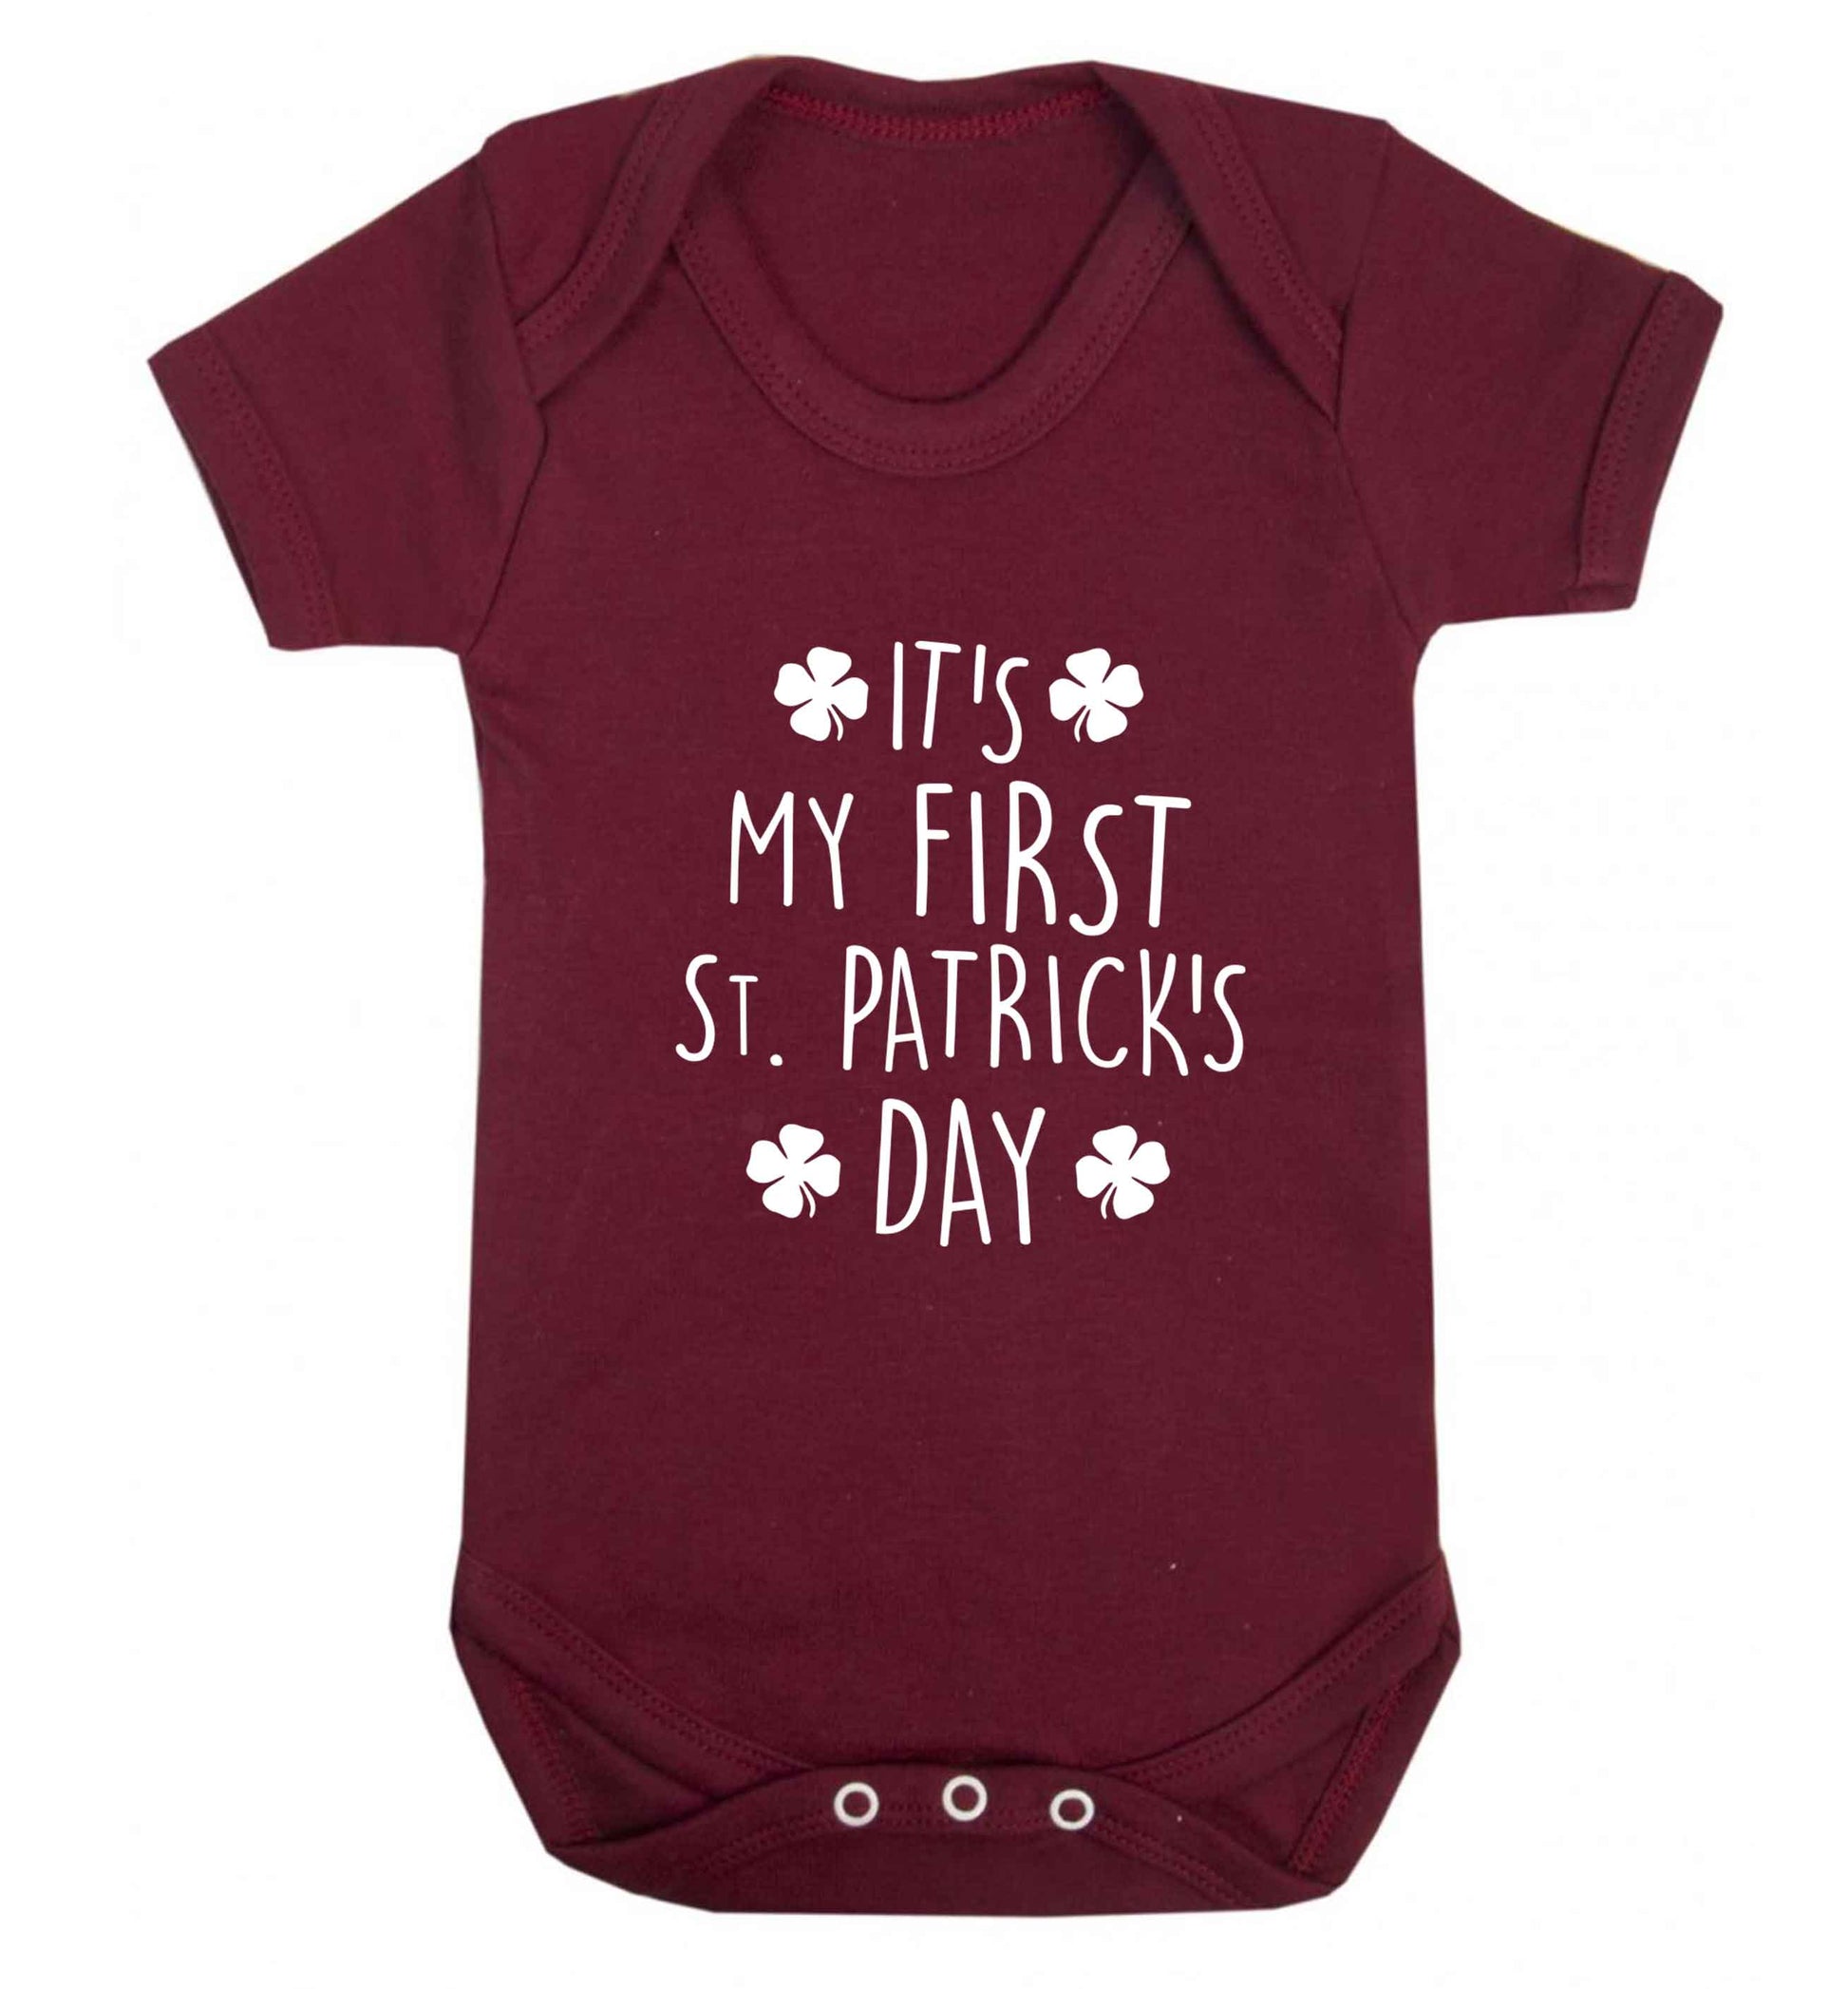 It's my first St.Patrick's day baby vest maroon 18-24 months